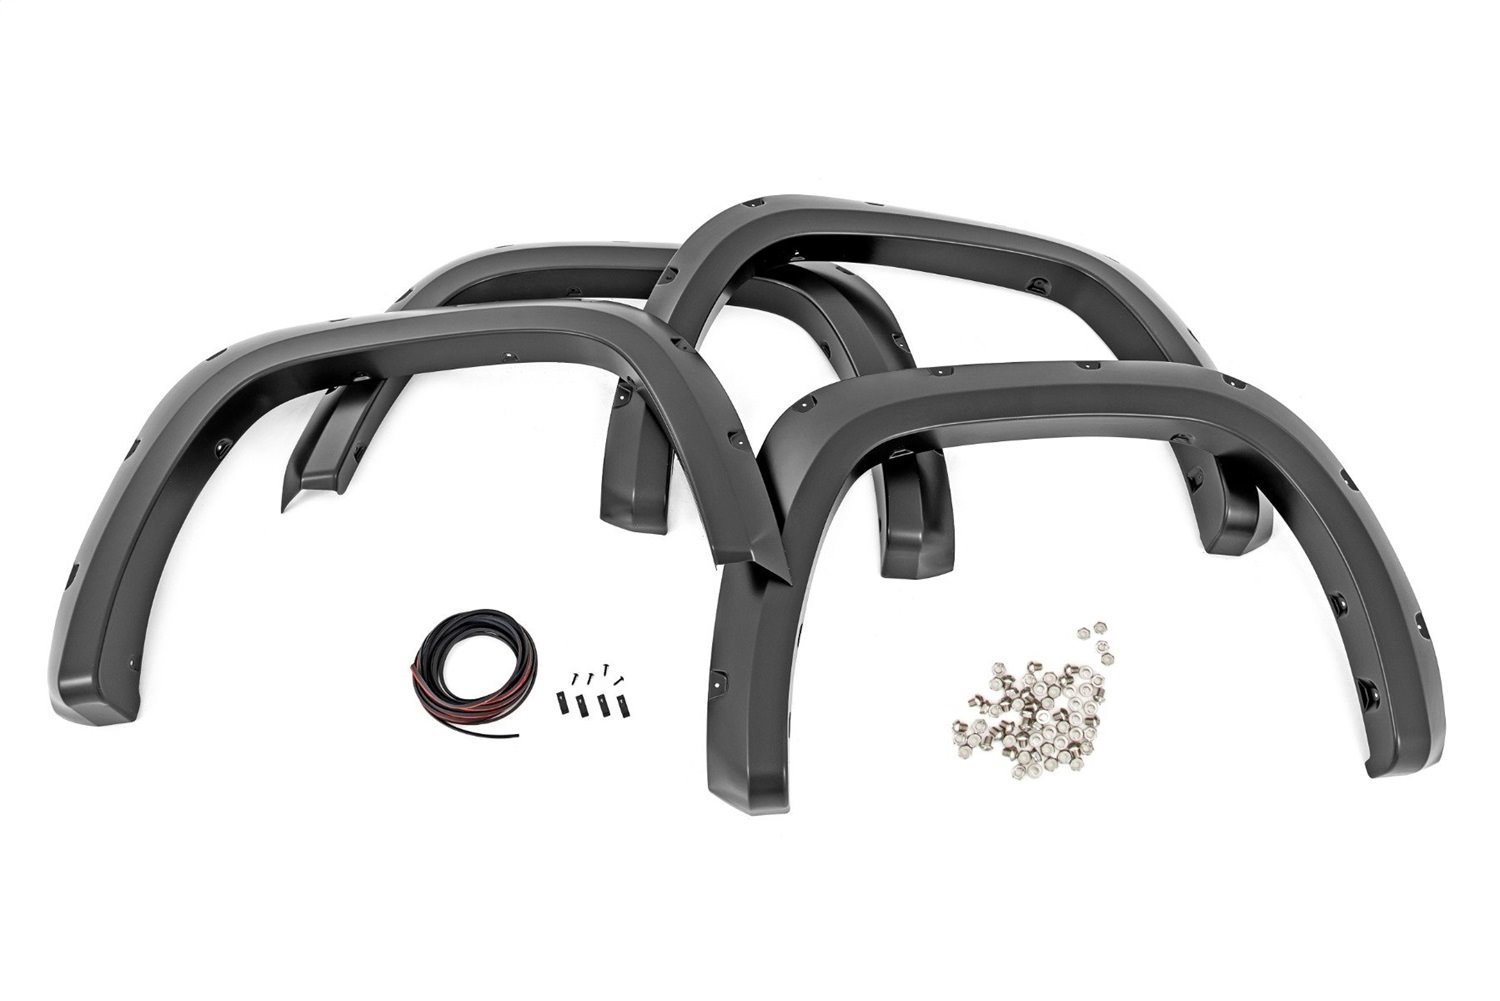 F-T11413 Traditional Pocket Fender Flares, Fits Select Toyota Tundra 2WD/4WD